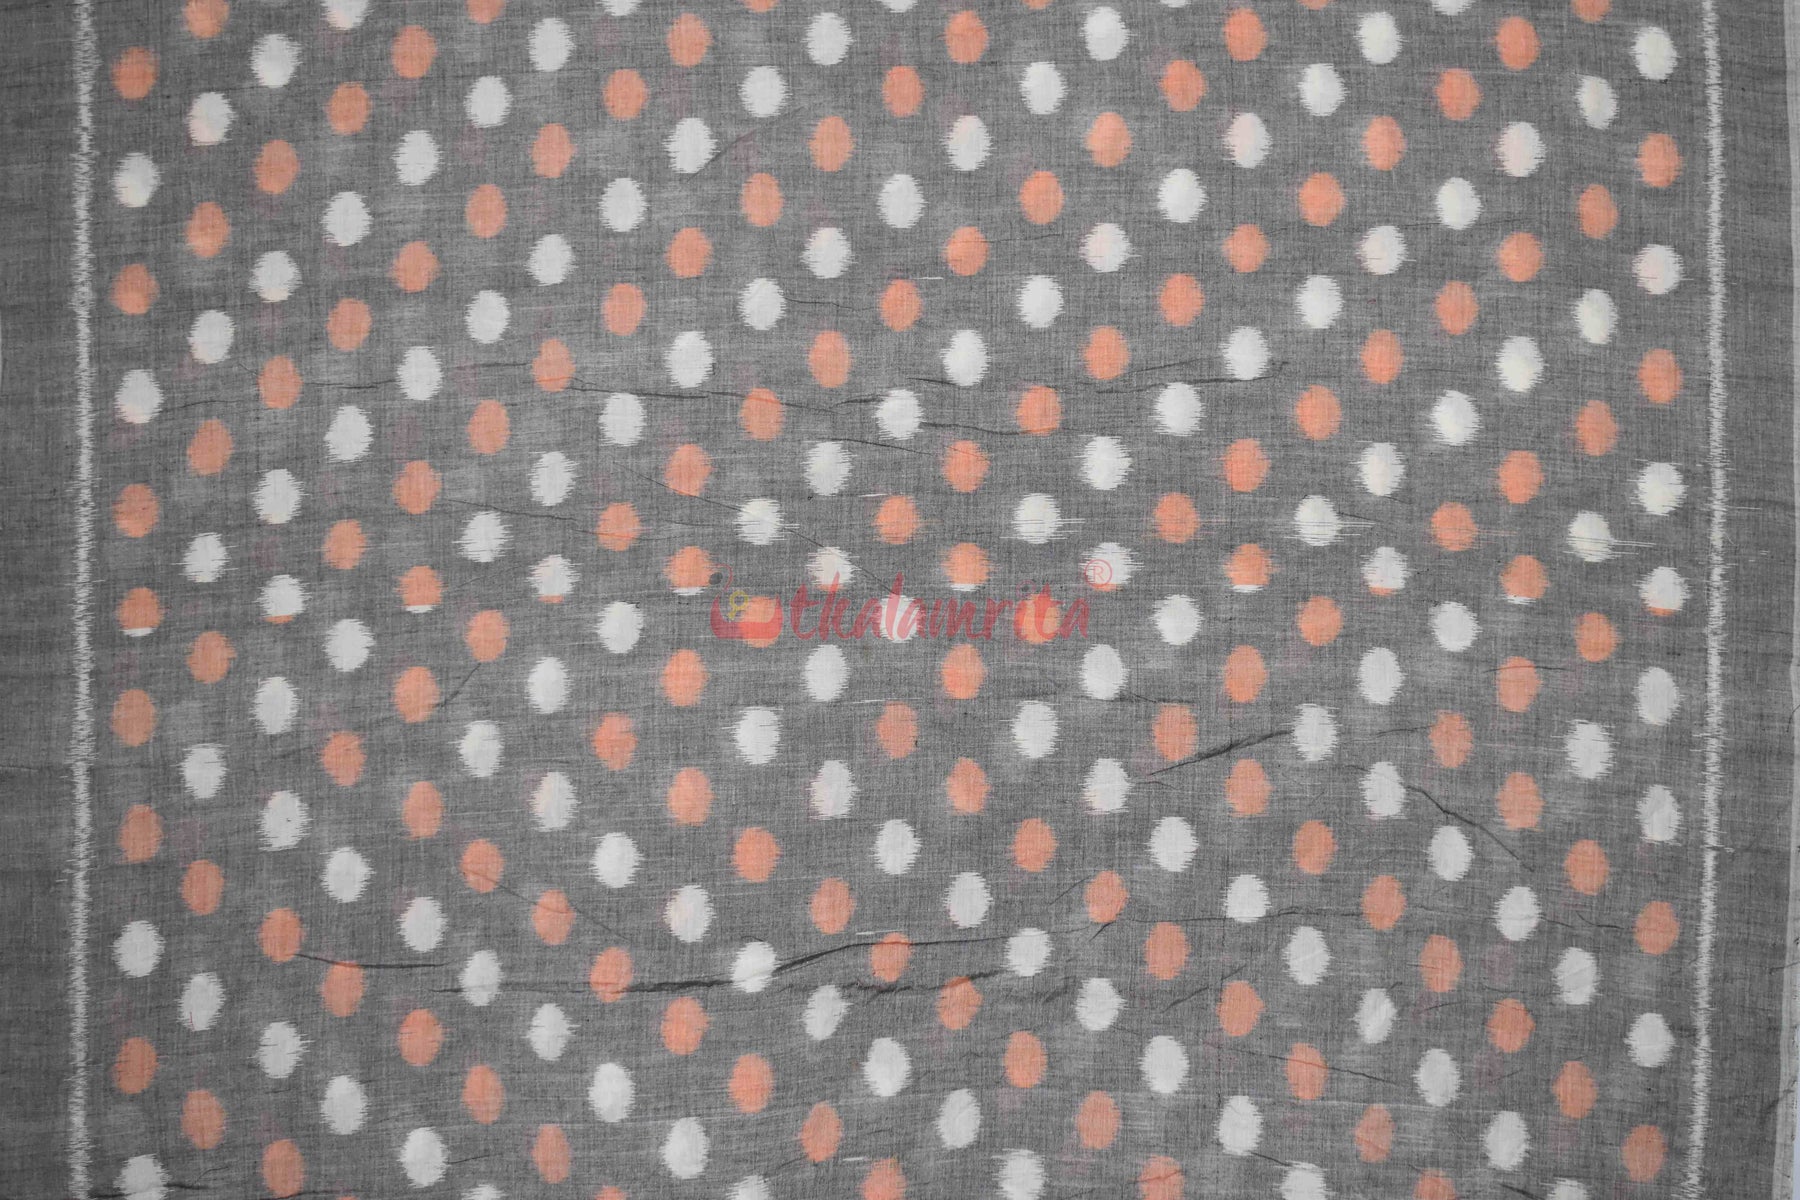 Bubbles on Grey (Fabric)